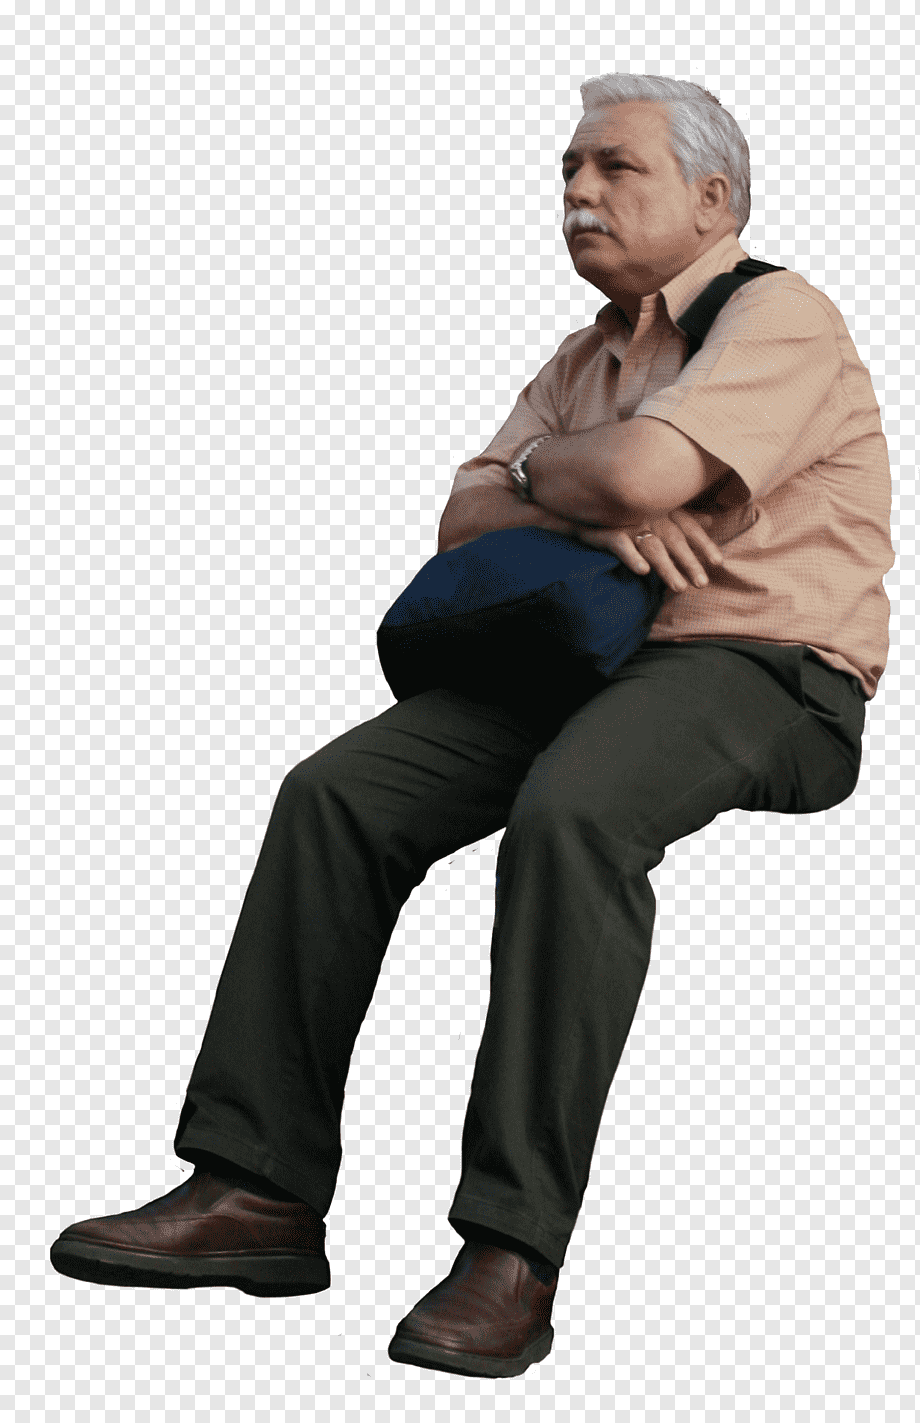 png-transparent-man-sitting-grandfather-rendering-texture-mapping-sitting-man-miscellaneous-3d-computer-graphics-photograph.png